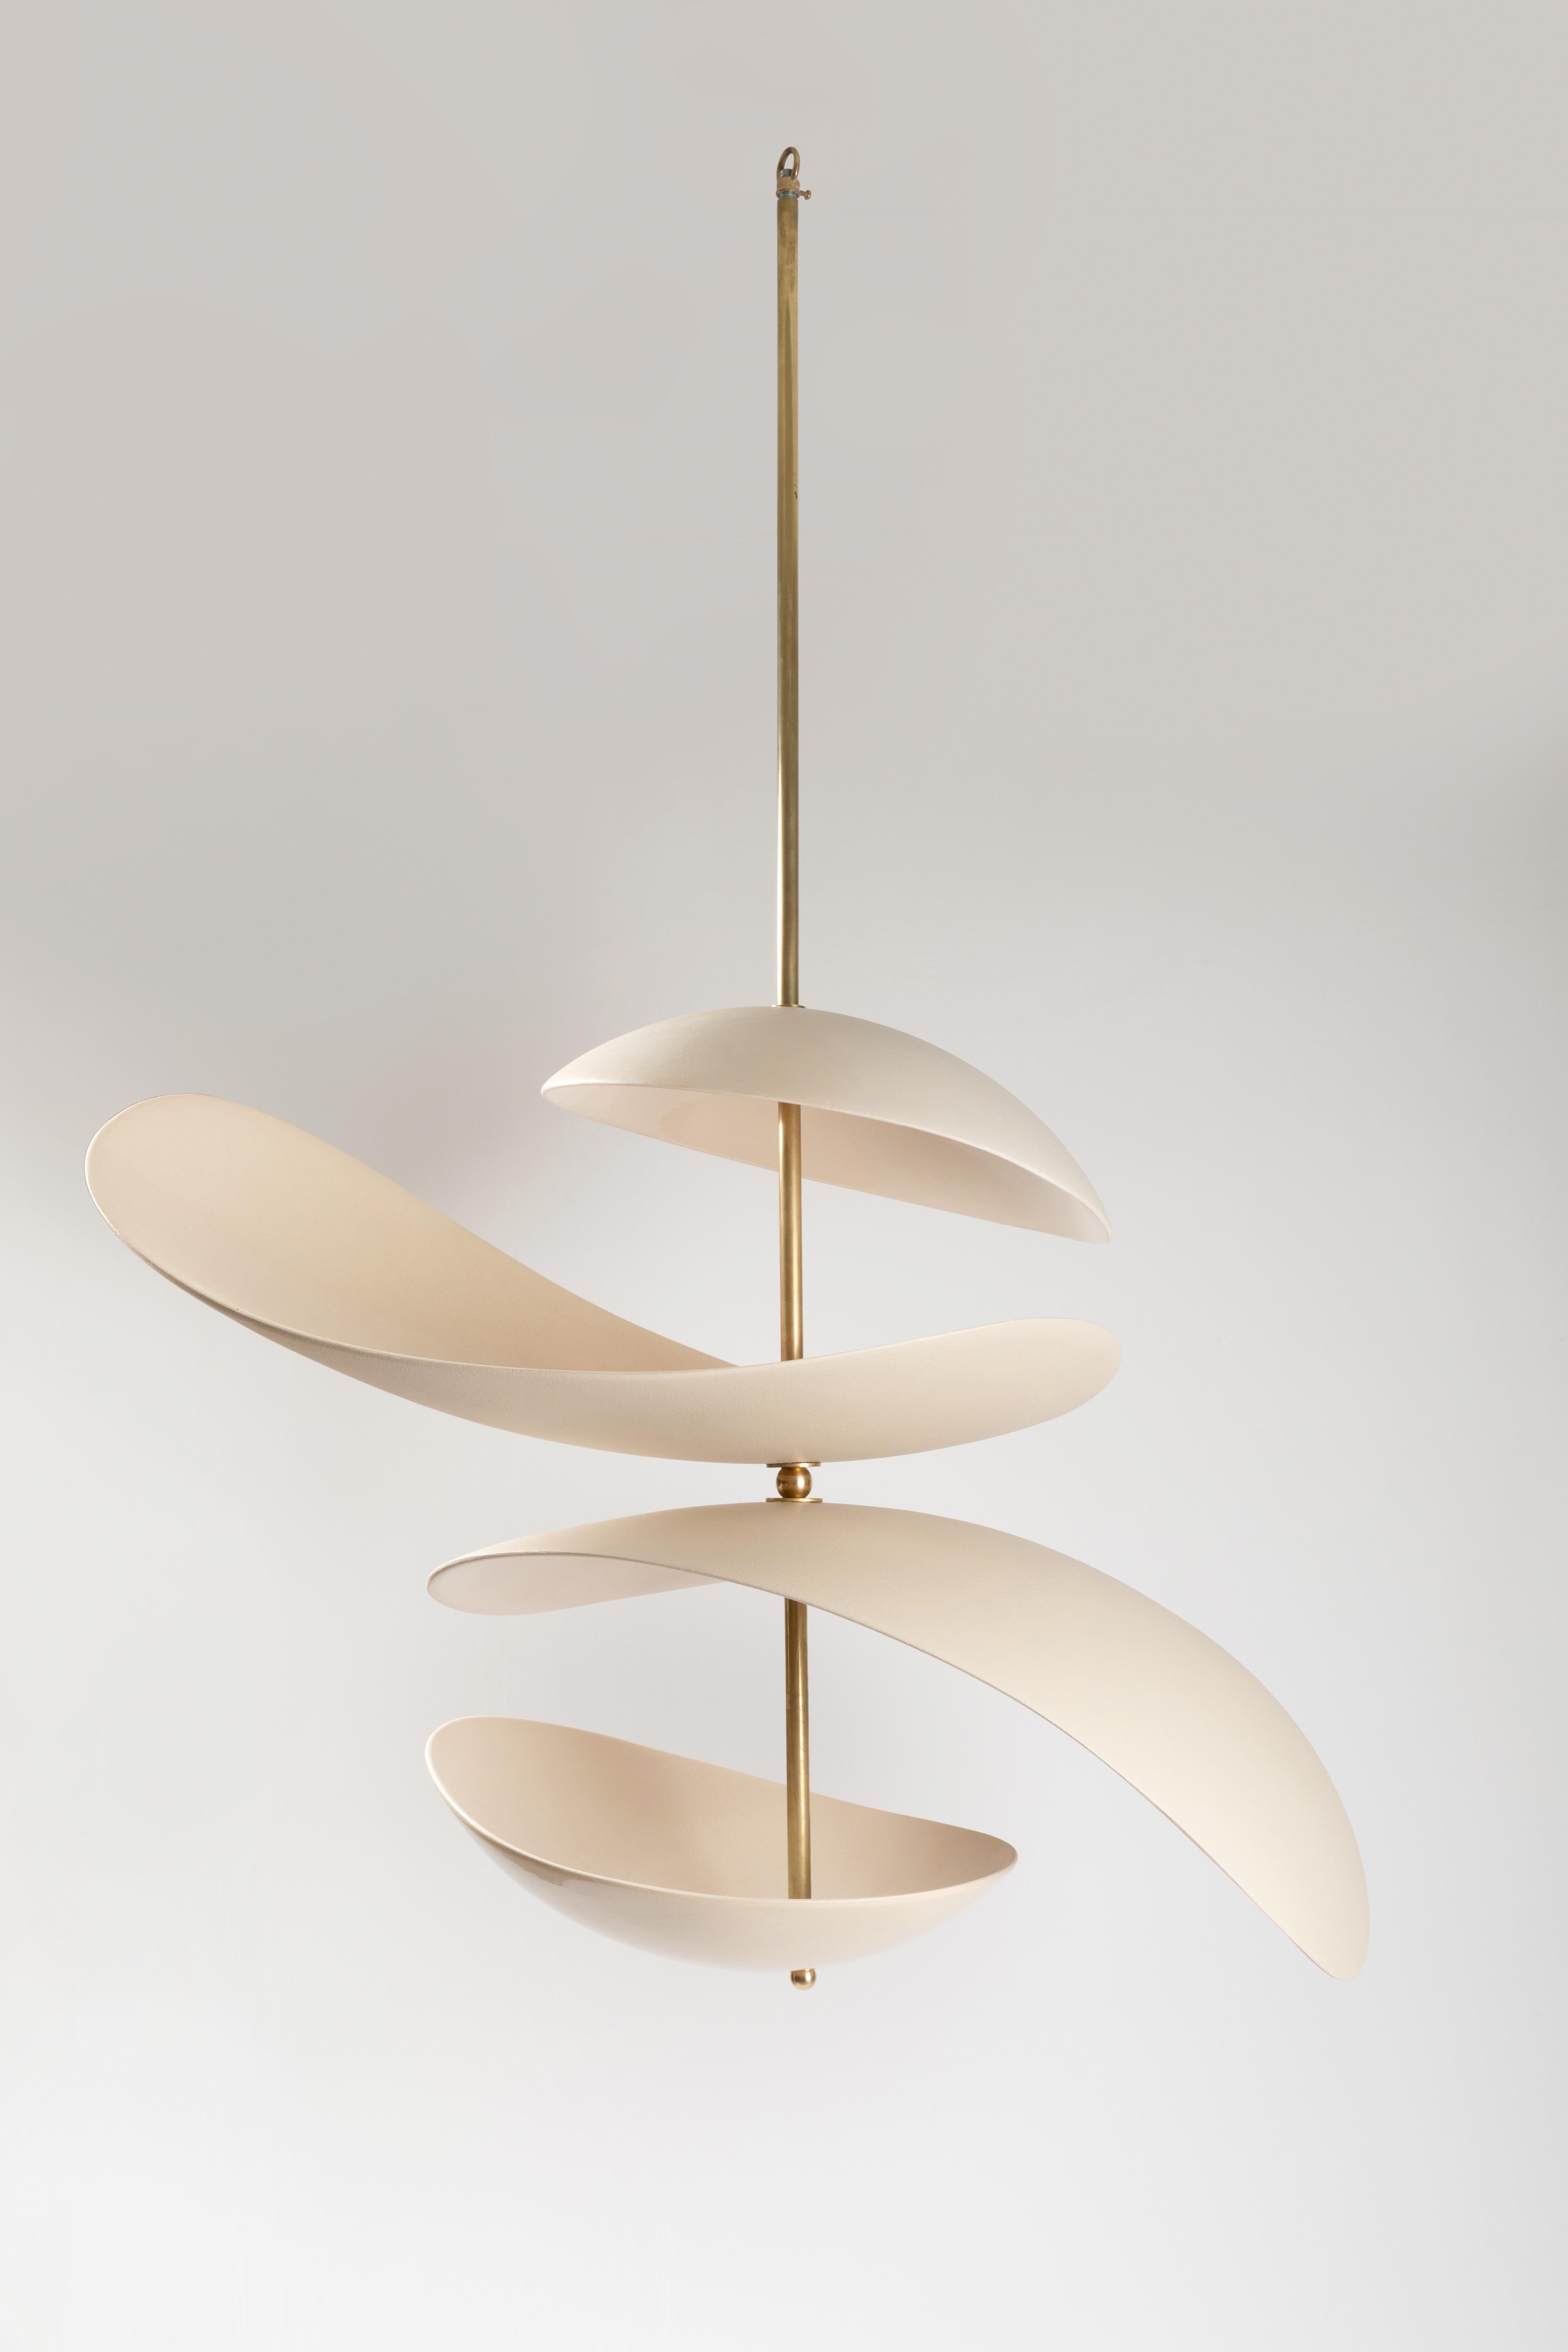 Petal pendant by Elsa Foulon
Dimensions: D 75 x H 50 cm 
Materials: Ceramic, brass
Unique Piece
Also available in different options: Bowl or cup (lower part).

All our lamps can be wired according to each country. If sold to the USA it will be